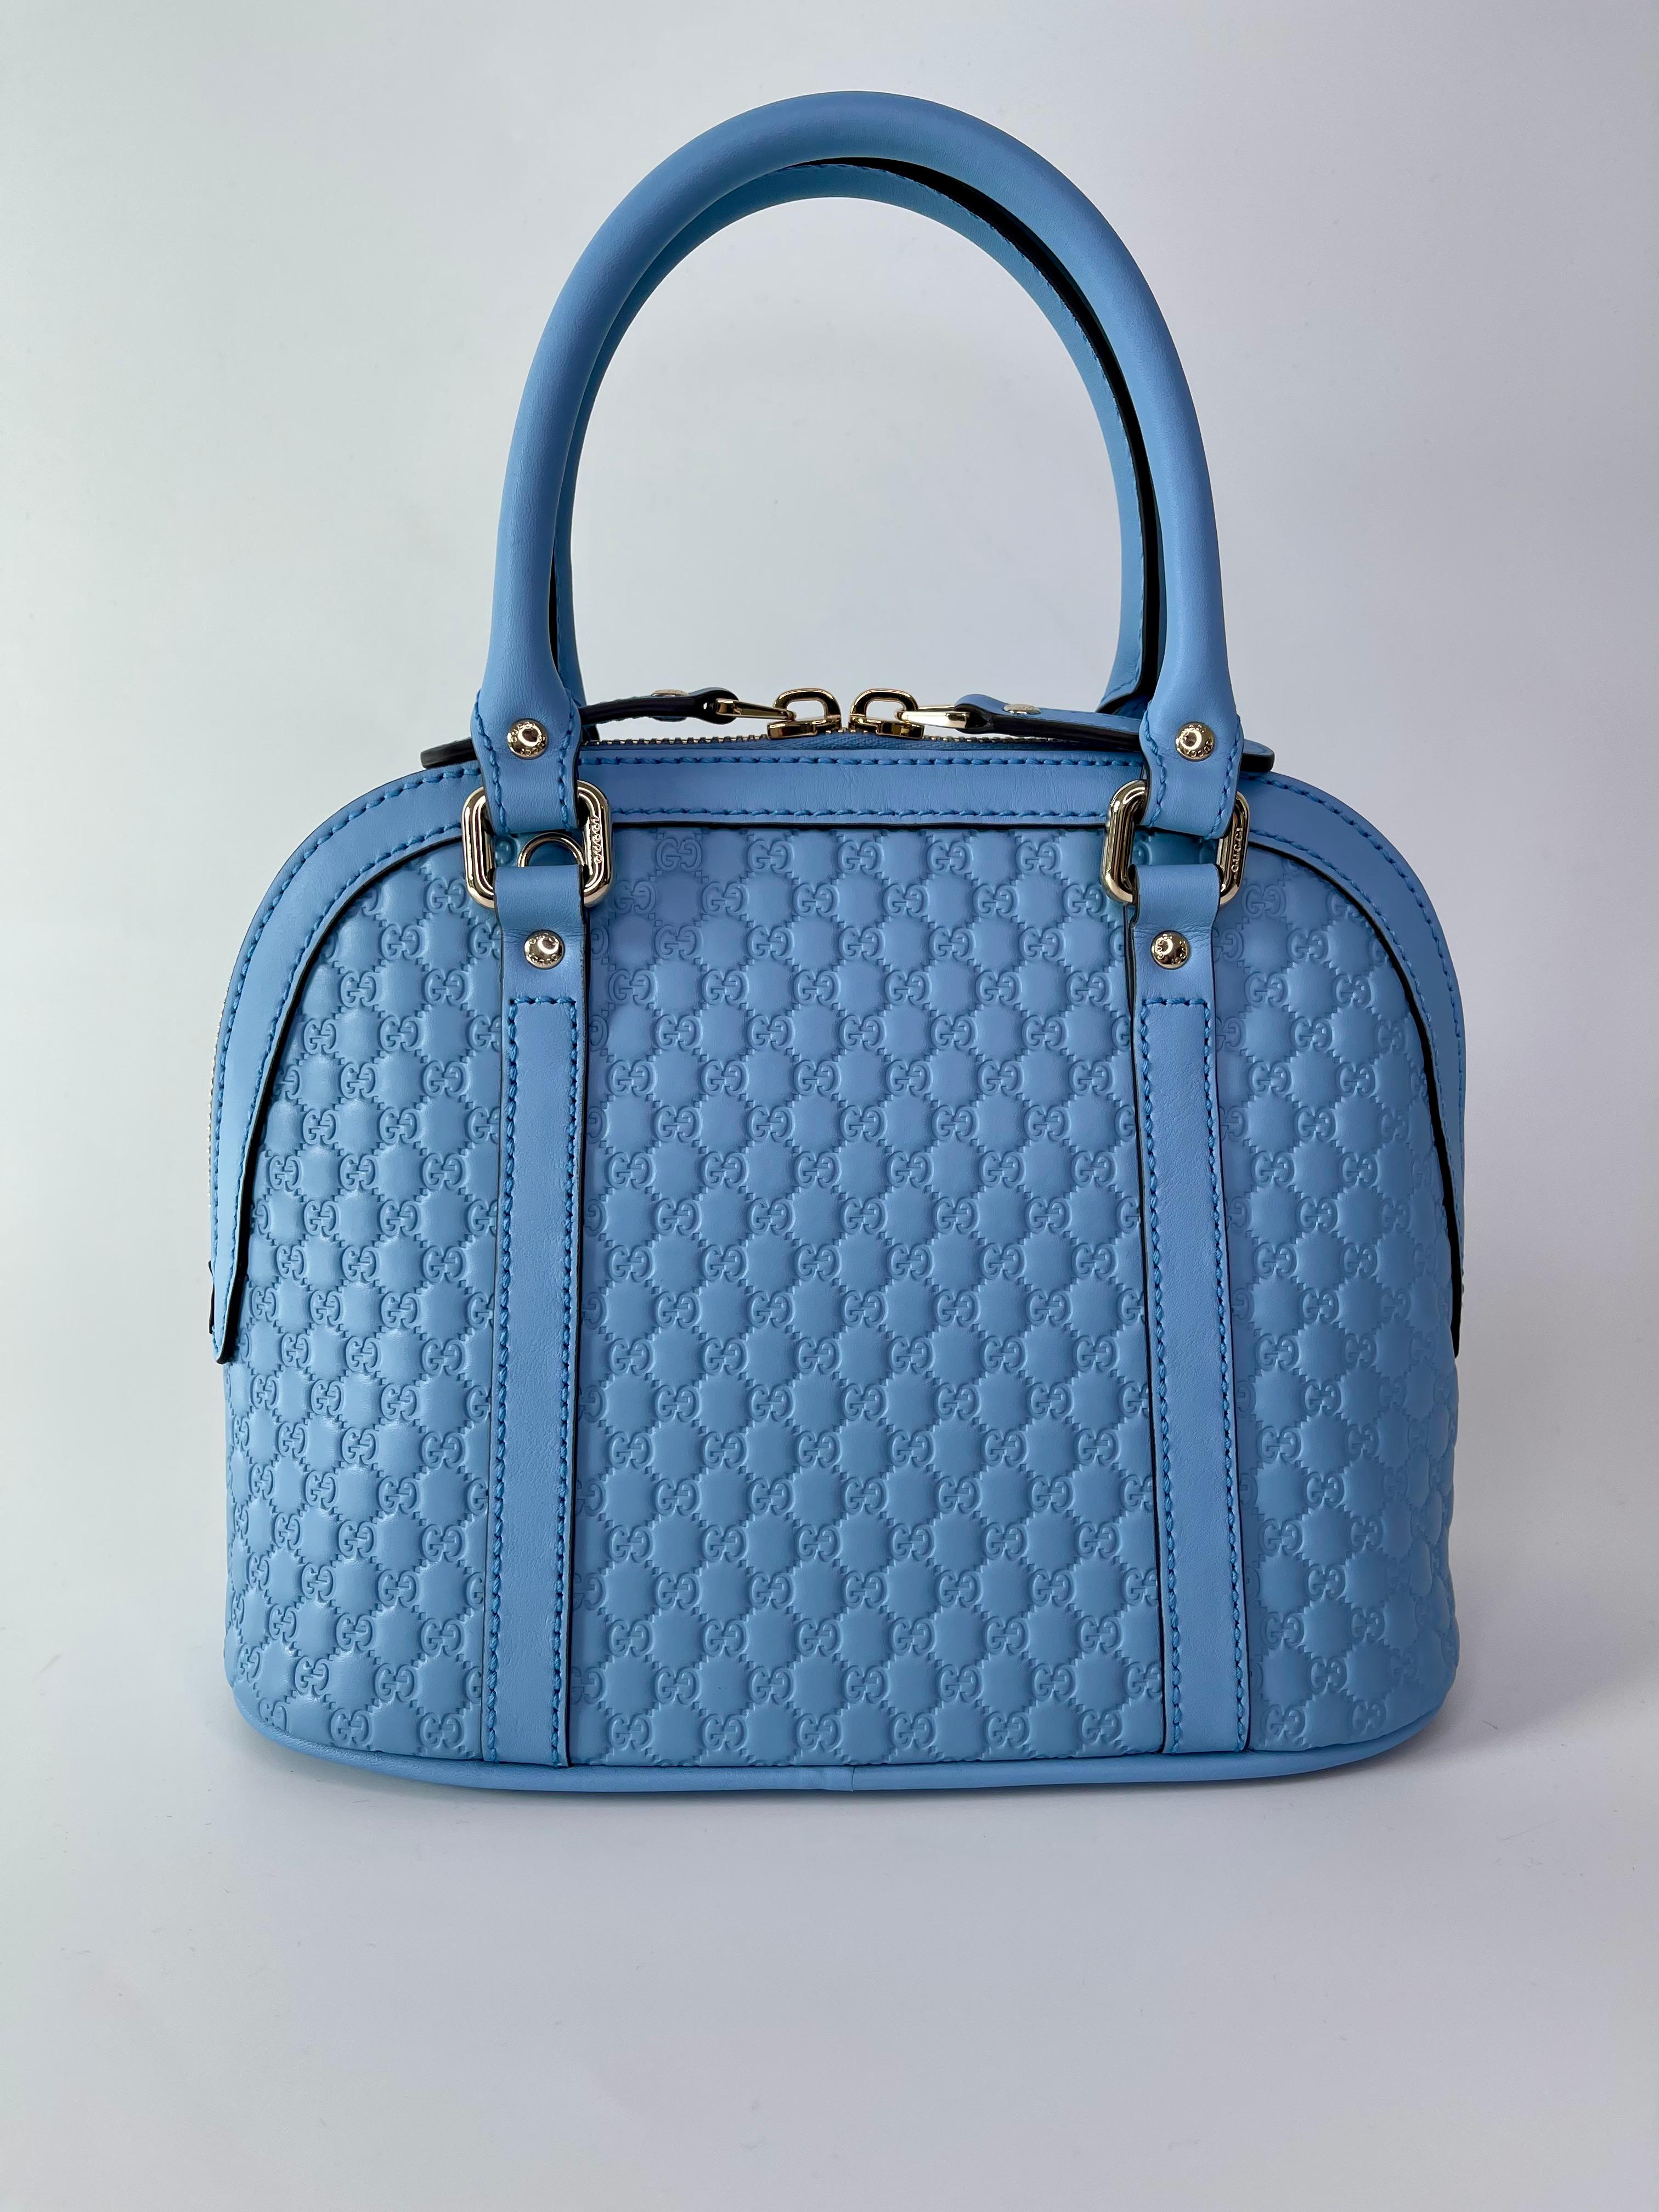 This bag is made with embossed microguccissima calf leather in light baby blue. The bag features dual rolled leather top handles, an optional shoulder strap and polished light gold hardware. The zipper opens to a spacious beige fabric interior with